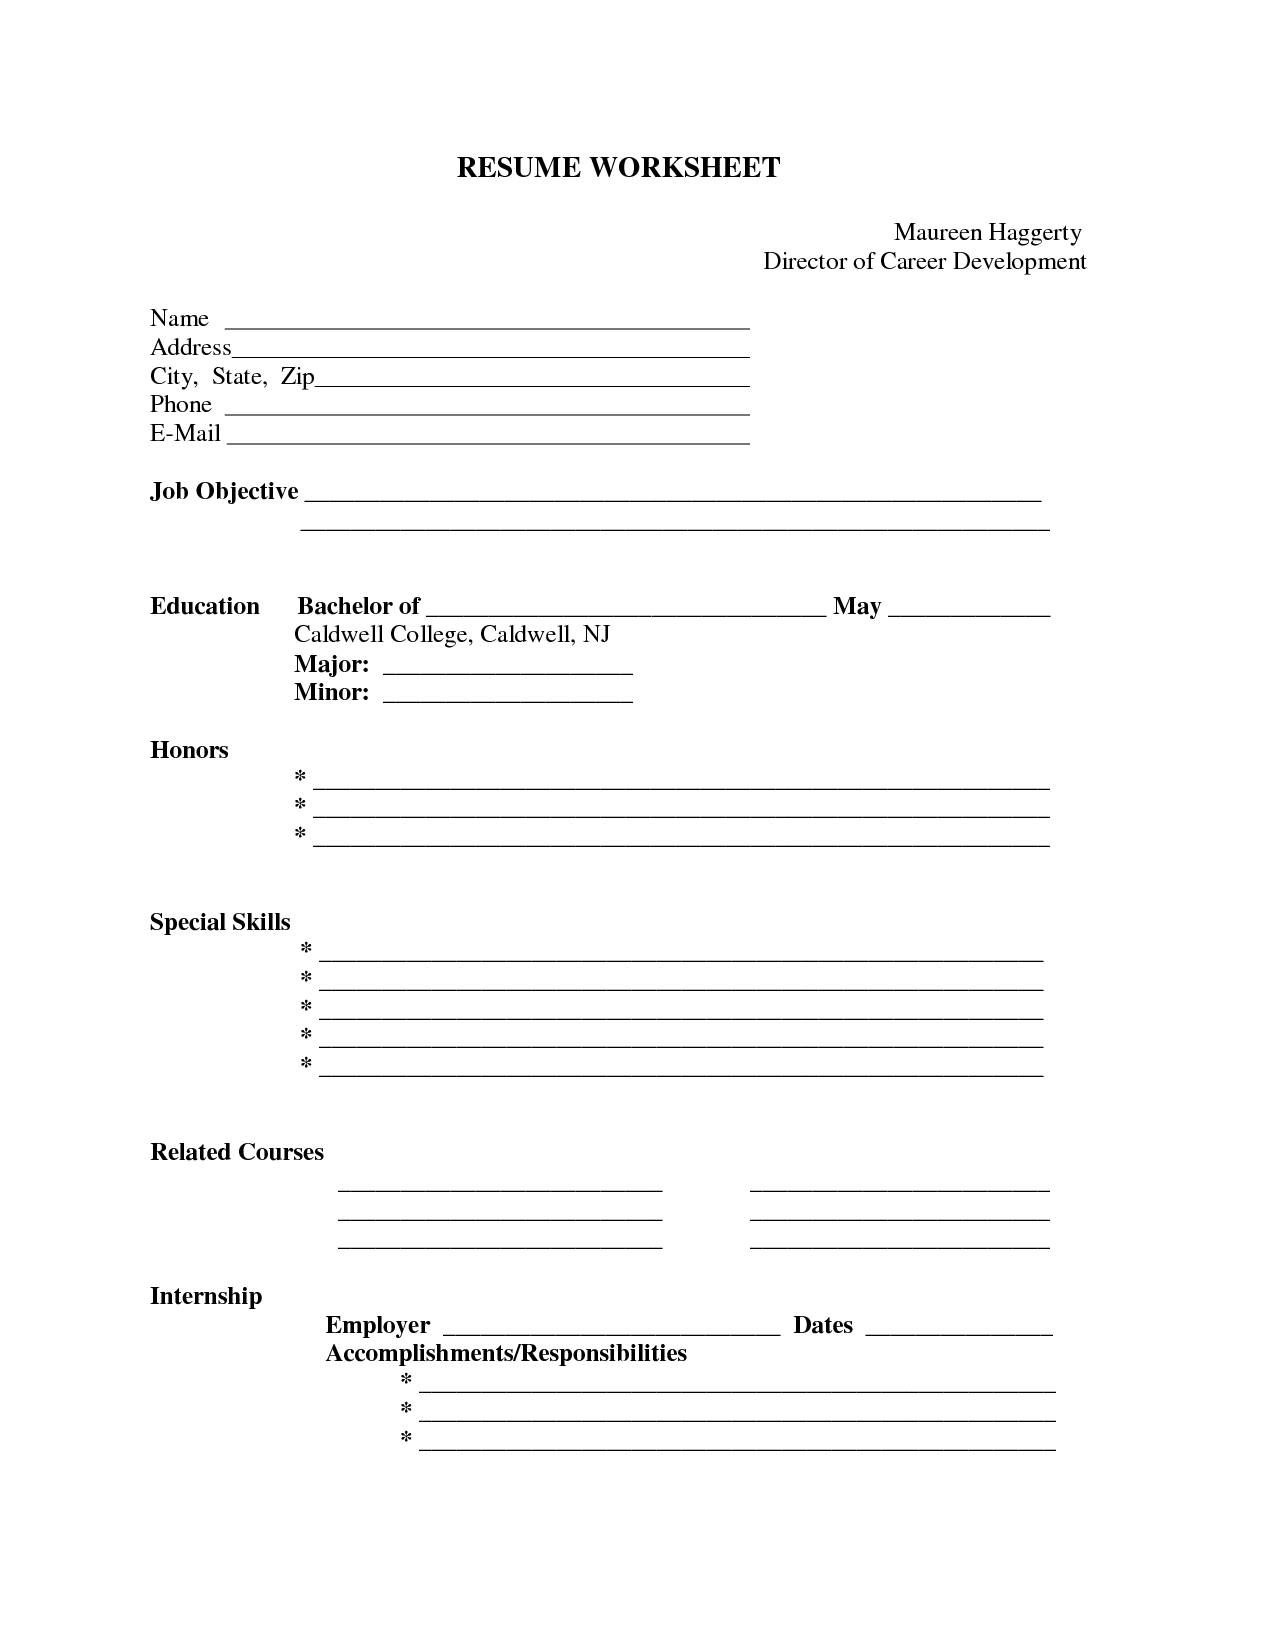 Resume Forms Free - Kaza.psstech.co - Free Printable Fill In The Blank Resume Templates